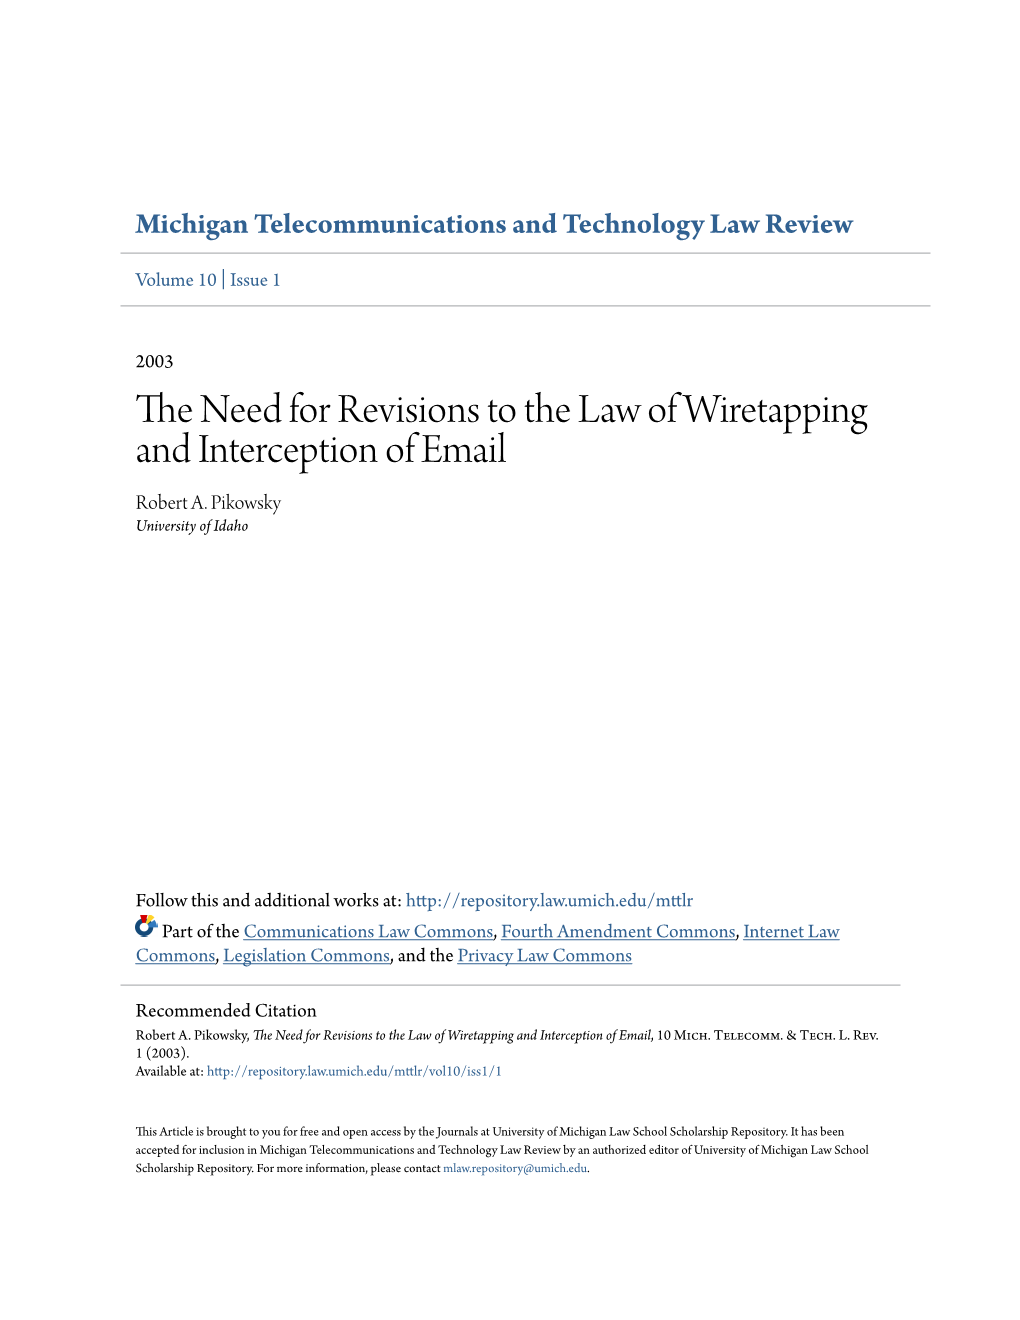 The Need for Revisions to the Law of Wiretapping and Interception of Email, 10 Mich